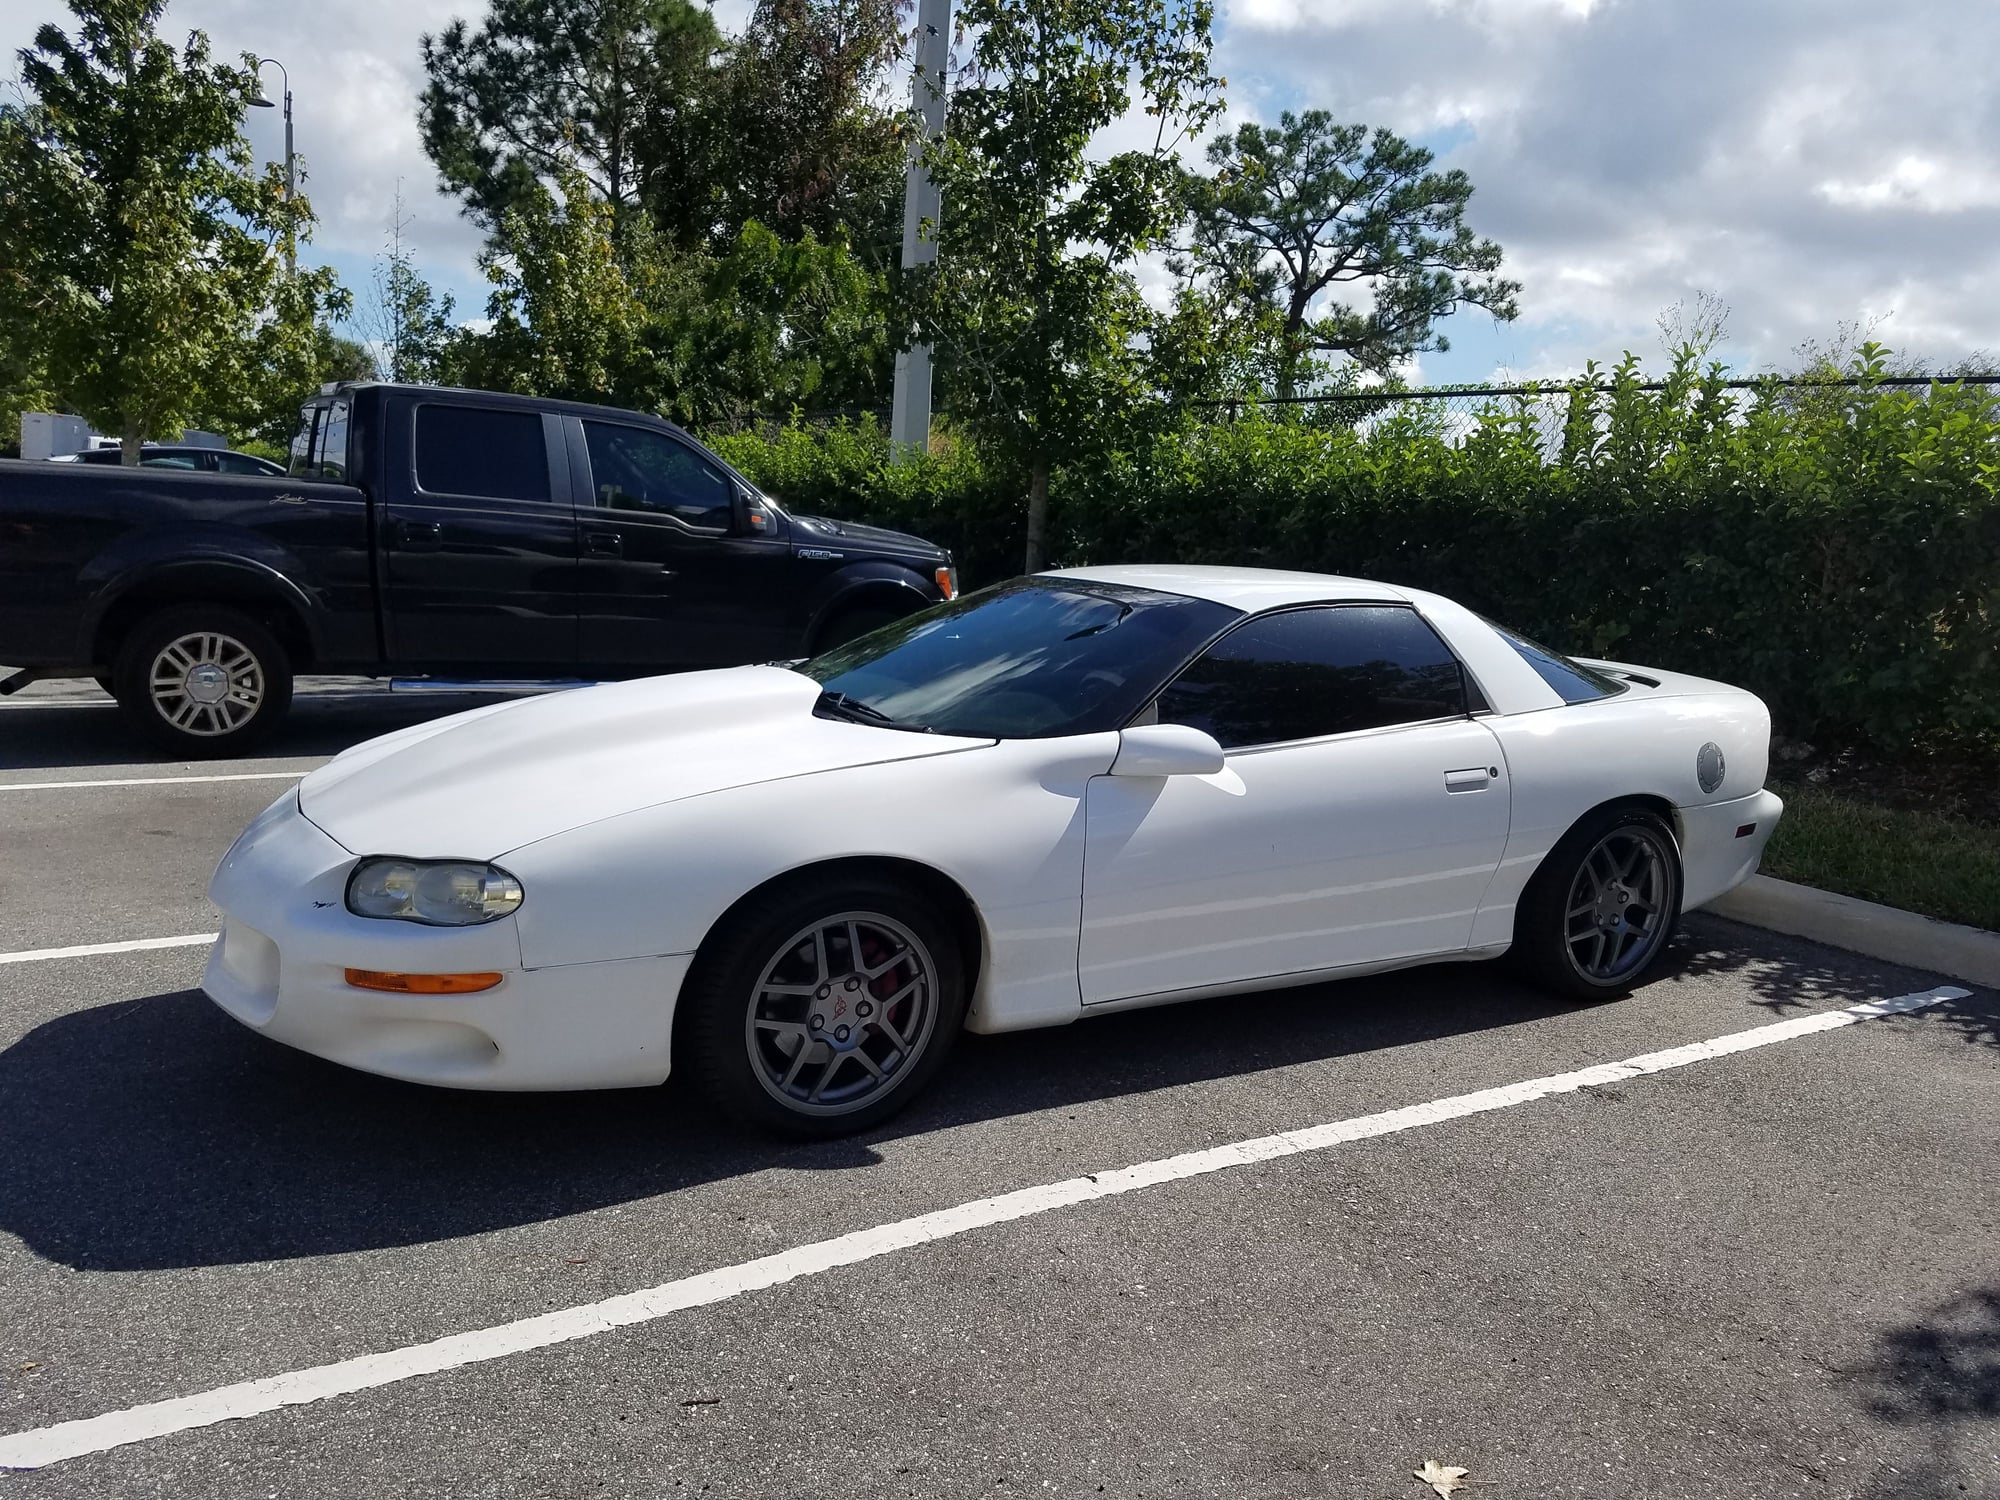 2000 Chevrolet Camaro - B4c code Z28 - Used - VIN 2G1FP22G0Y2141021 - 123,000 Miles - 8 cyl - 2WD - Automatic - Coupe - White - Orlando, FL 32819, United States